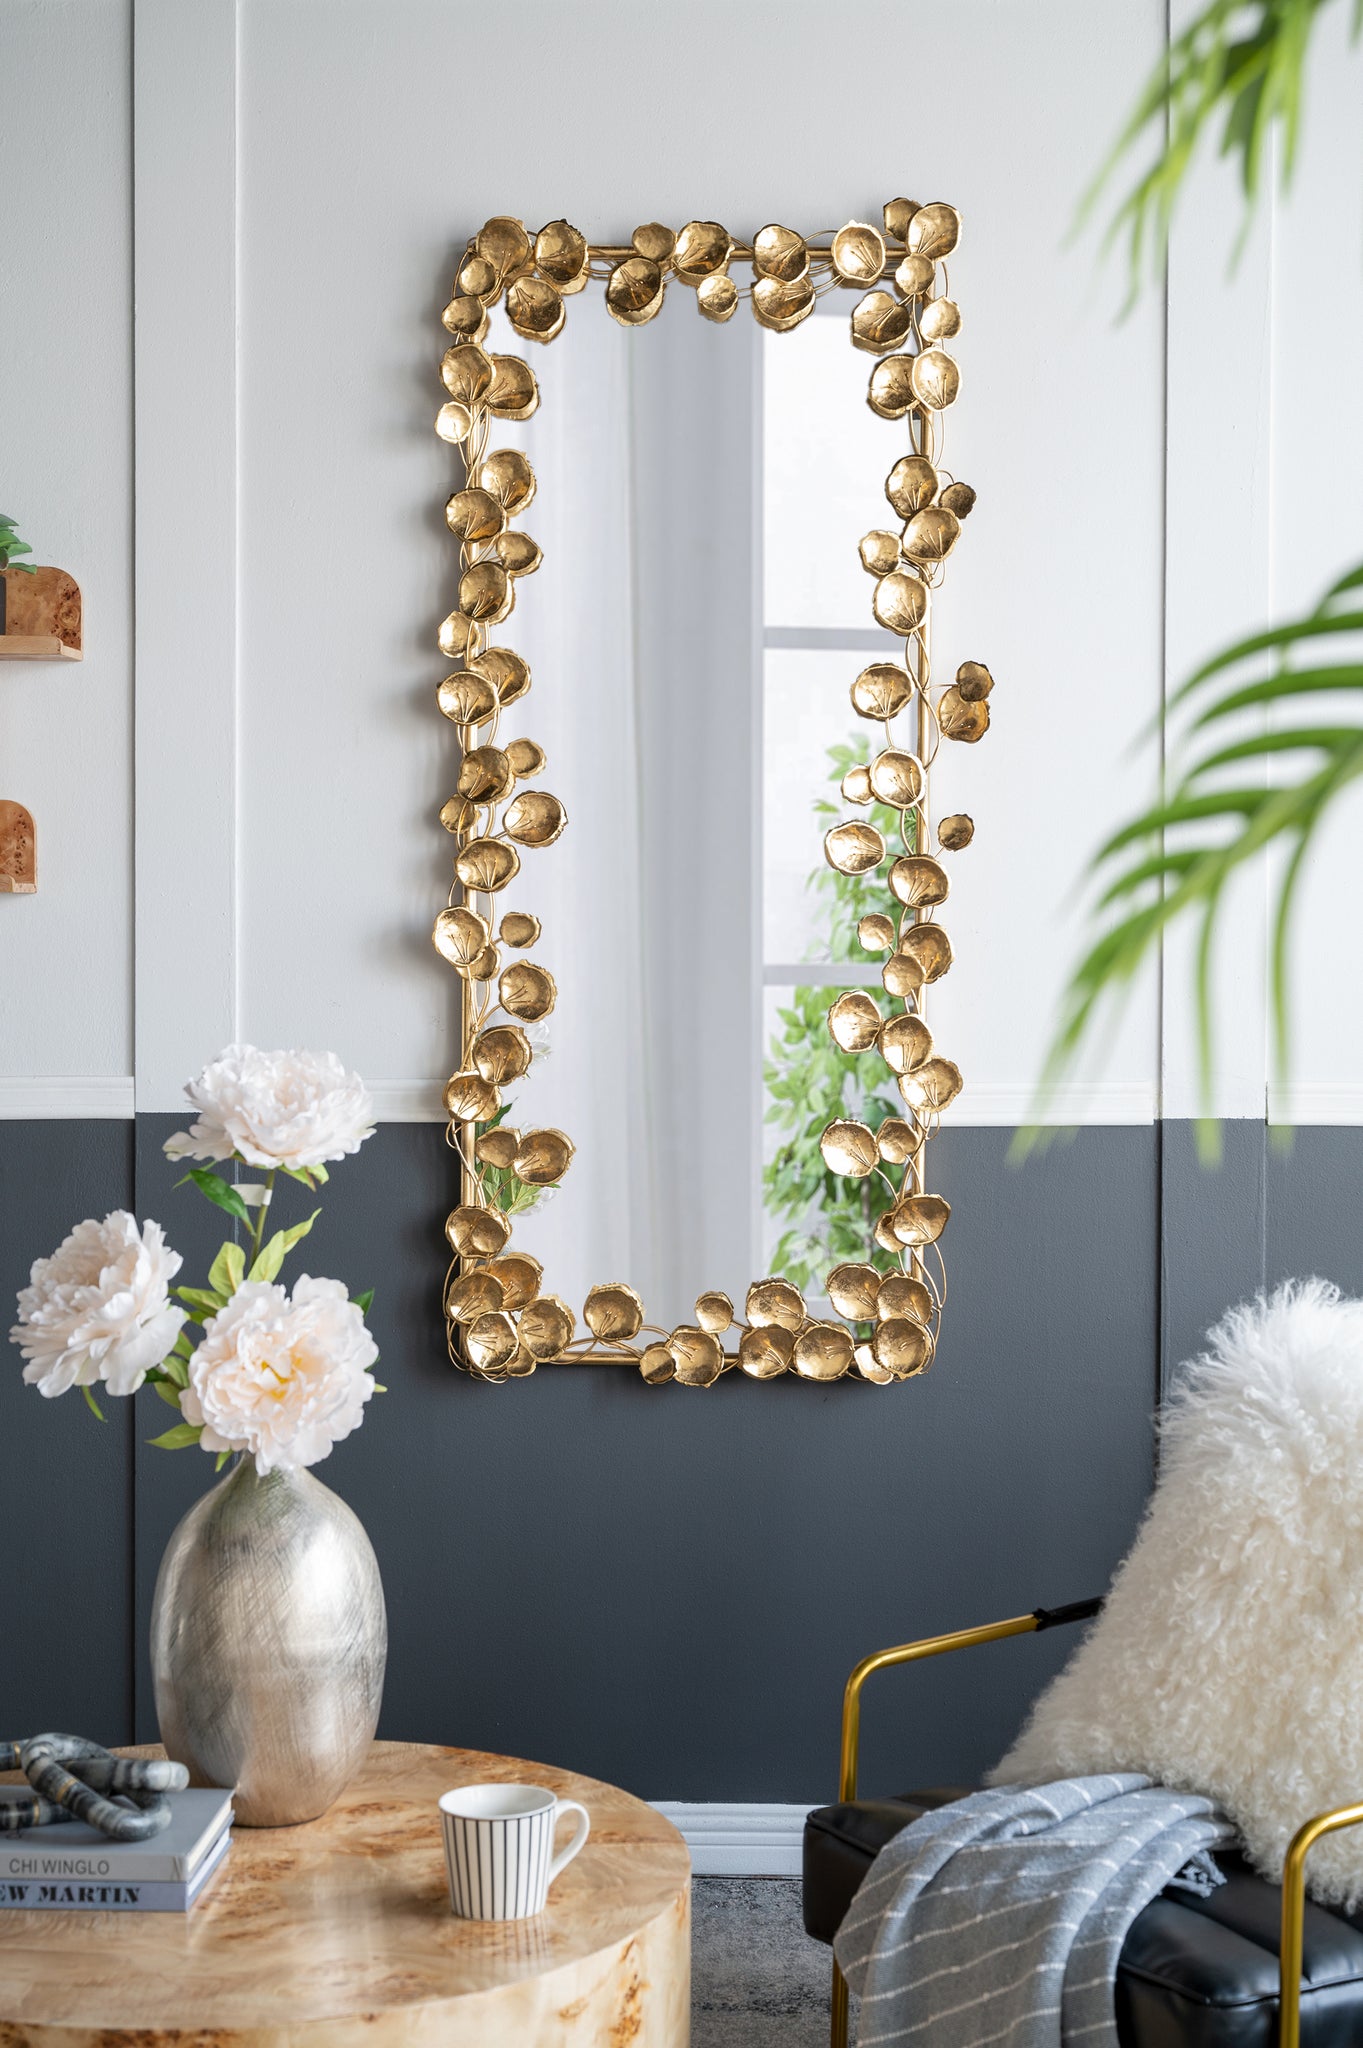 61" x 31" Full Length Mirror with Golden Leaf Accents gold-iron